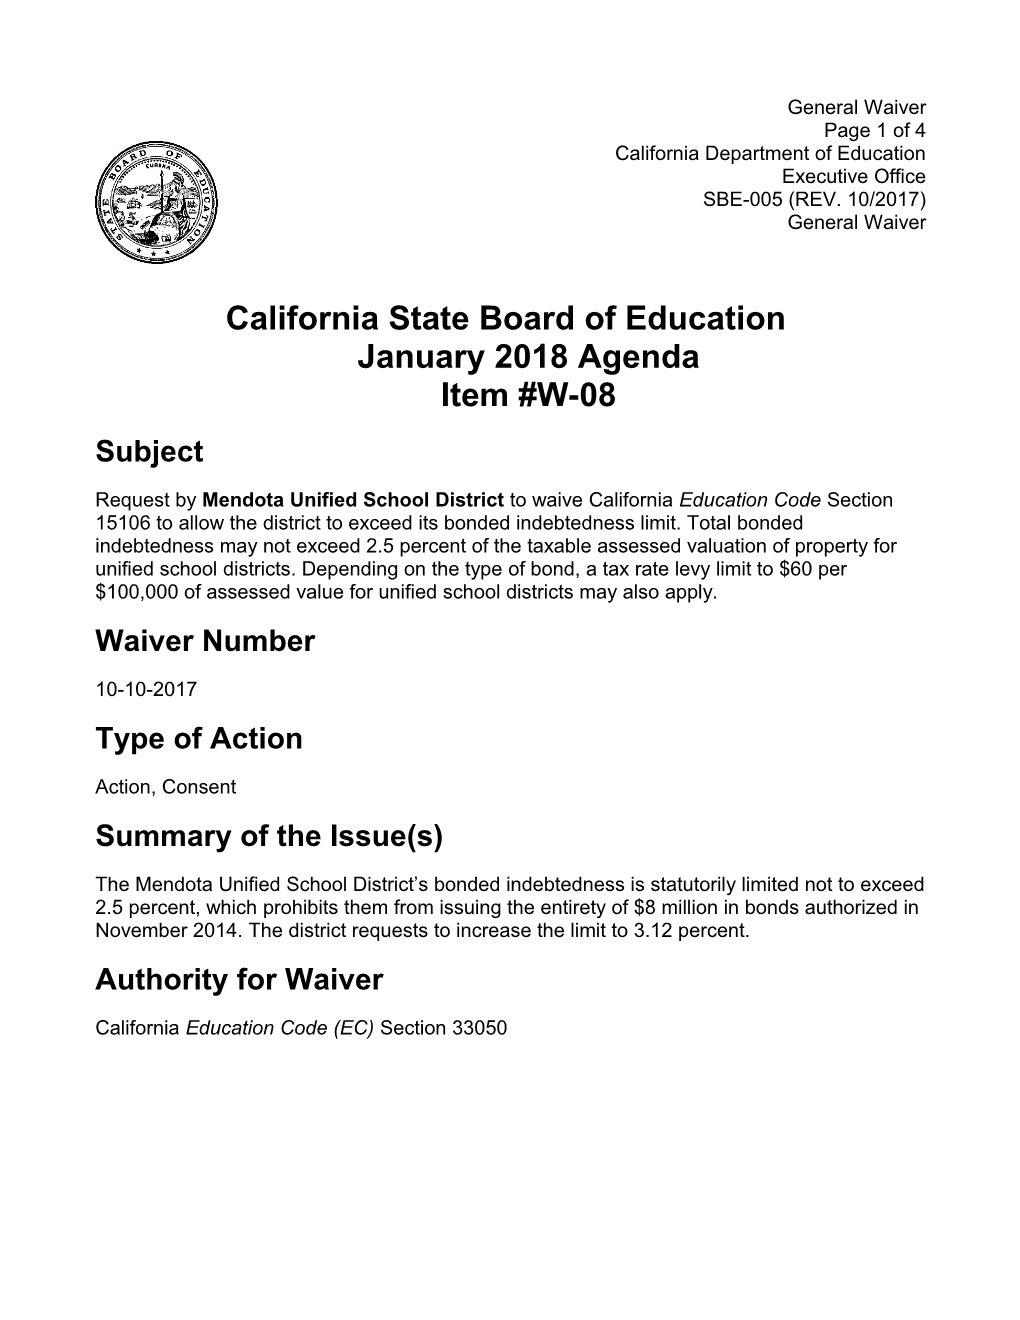 January 2018 Waiver Item W-08 - Meeting Agendas (CA State Board of Education)